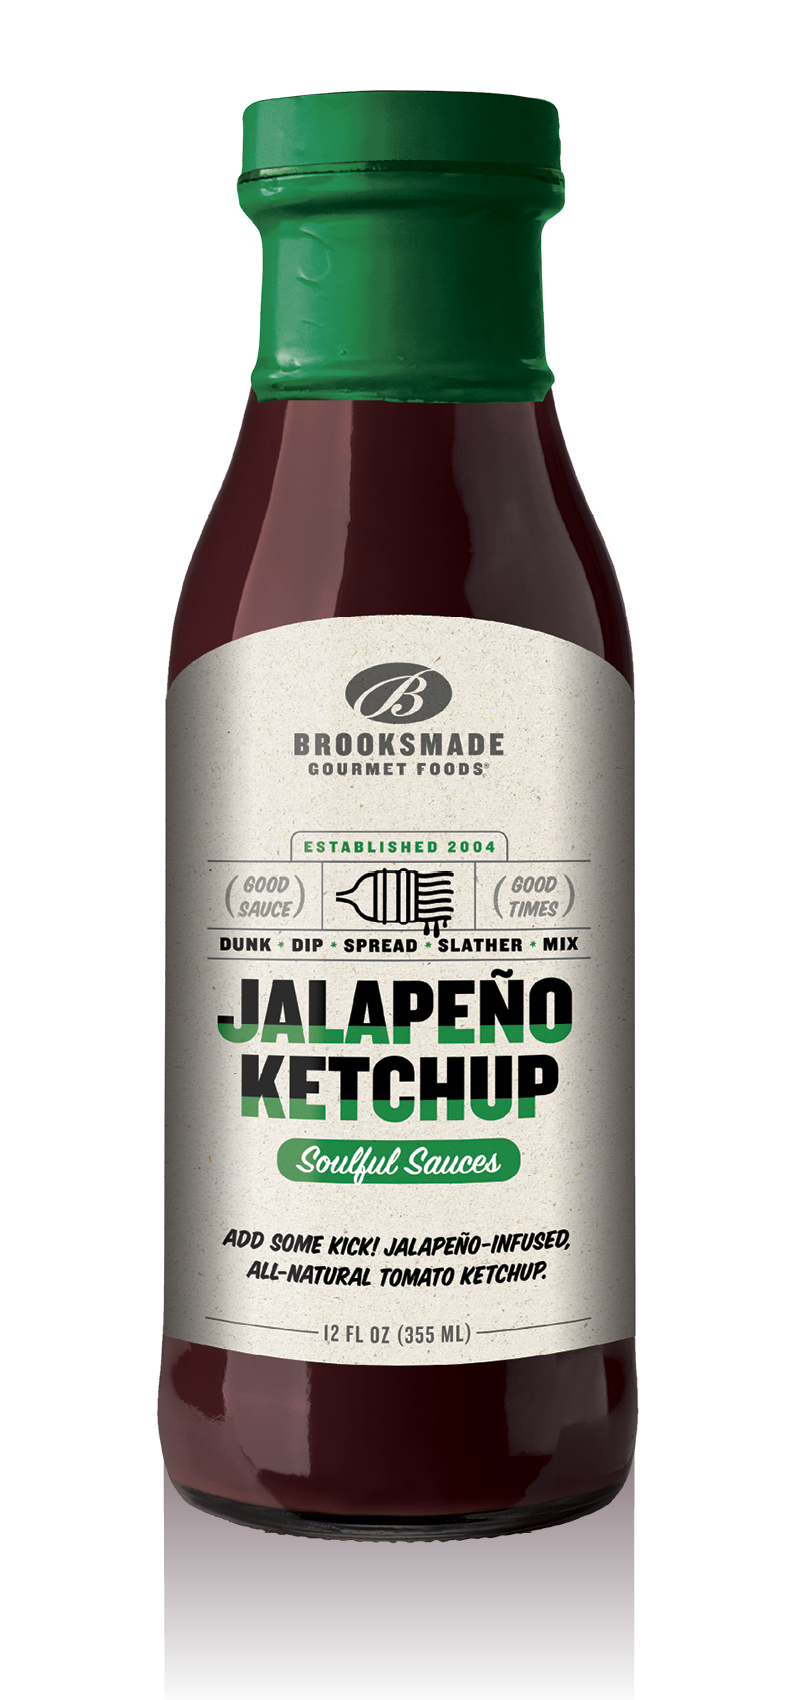 Jalapeño Ketchup, Gluten Free, No High Fructose Corn Syrup All-Natural Spicy Ketchup, Made with Organic Tomatoes, 12 oz Unit